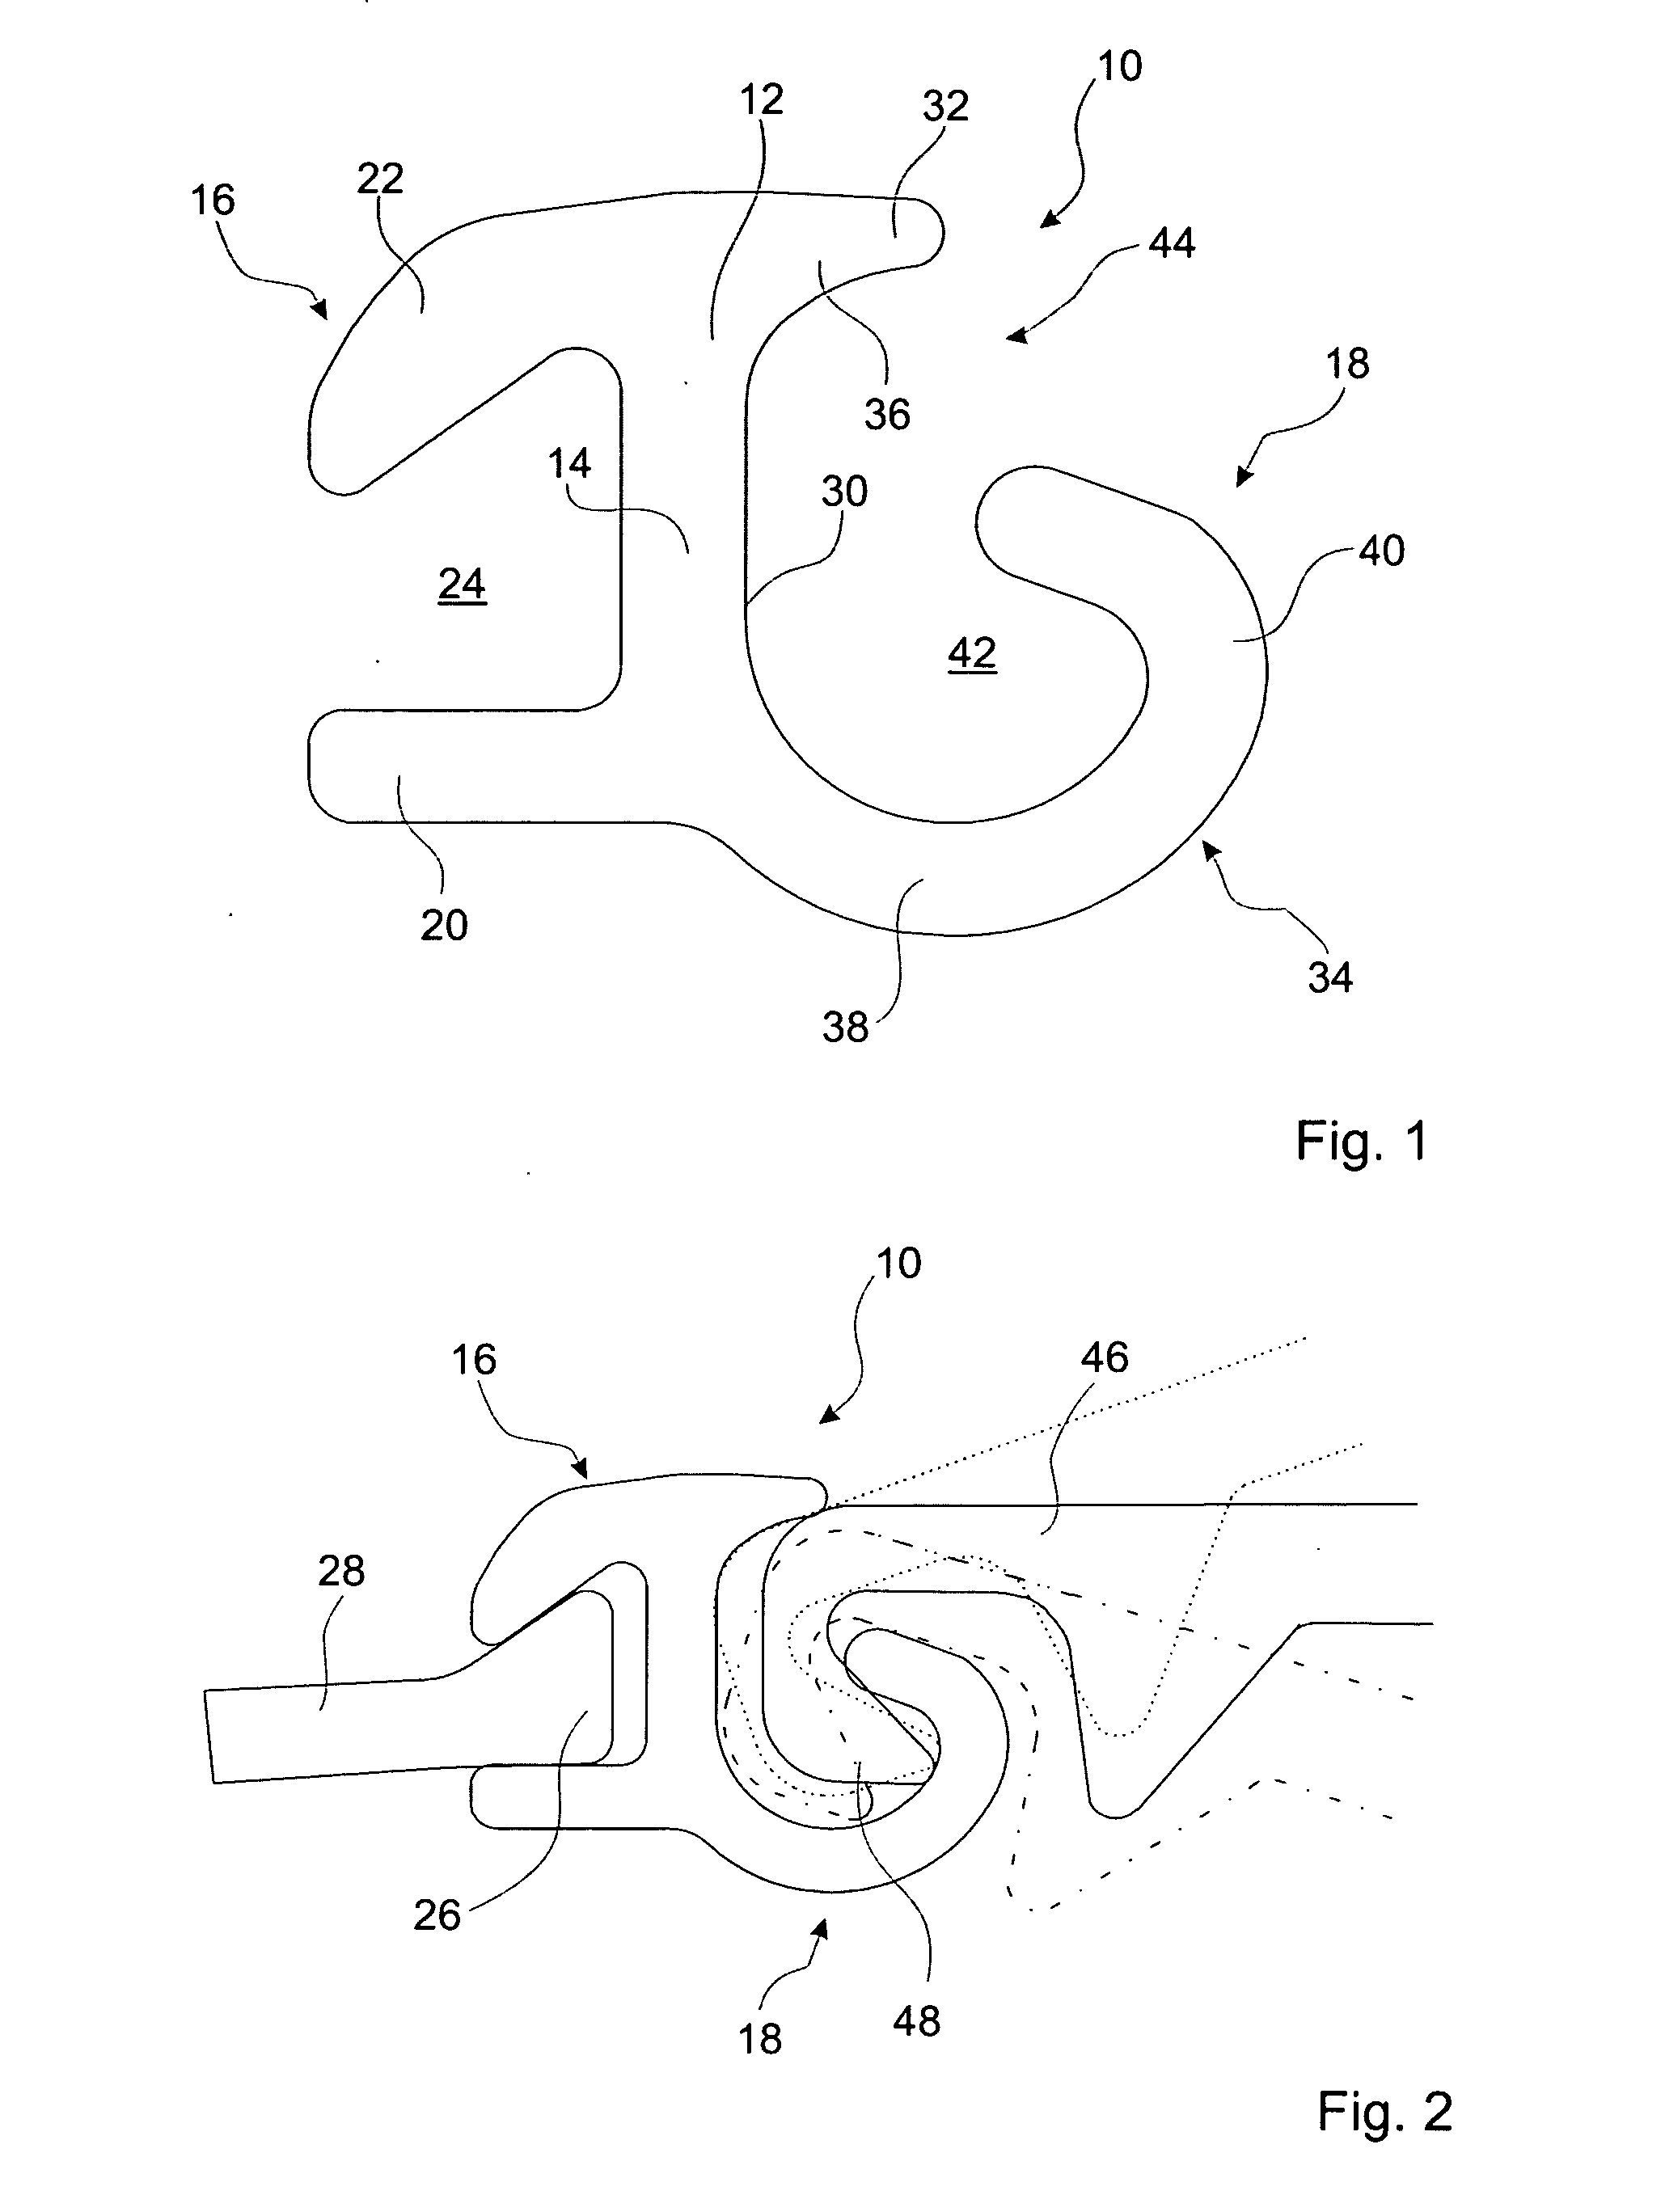 Connecting Profiled Element for Connecting Sheet Piles to Carrier Elements, and Combined Sheets Piling Comprising one Such Connecting Profiled Element